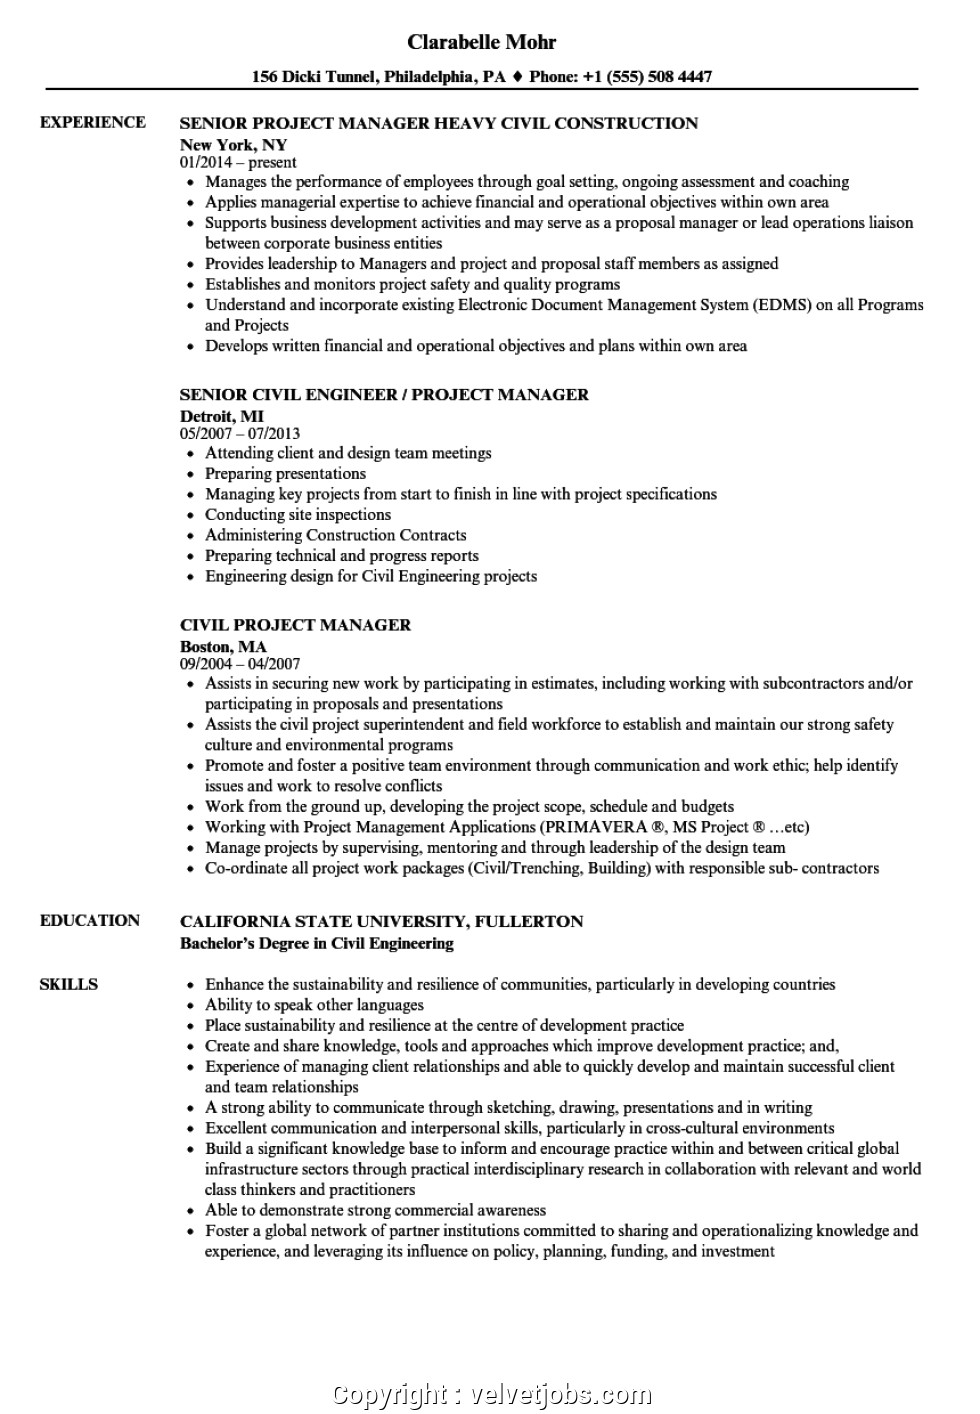 top civil engineer project manager resume